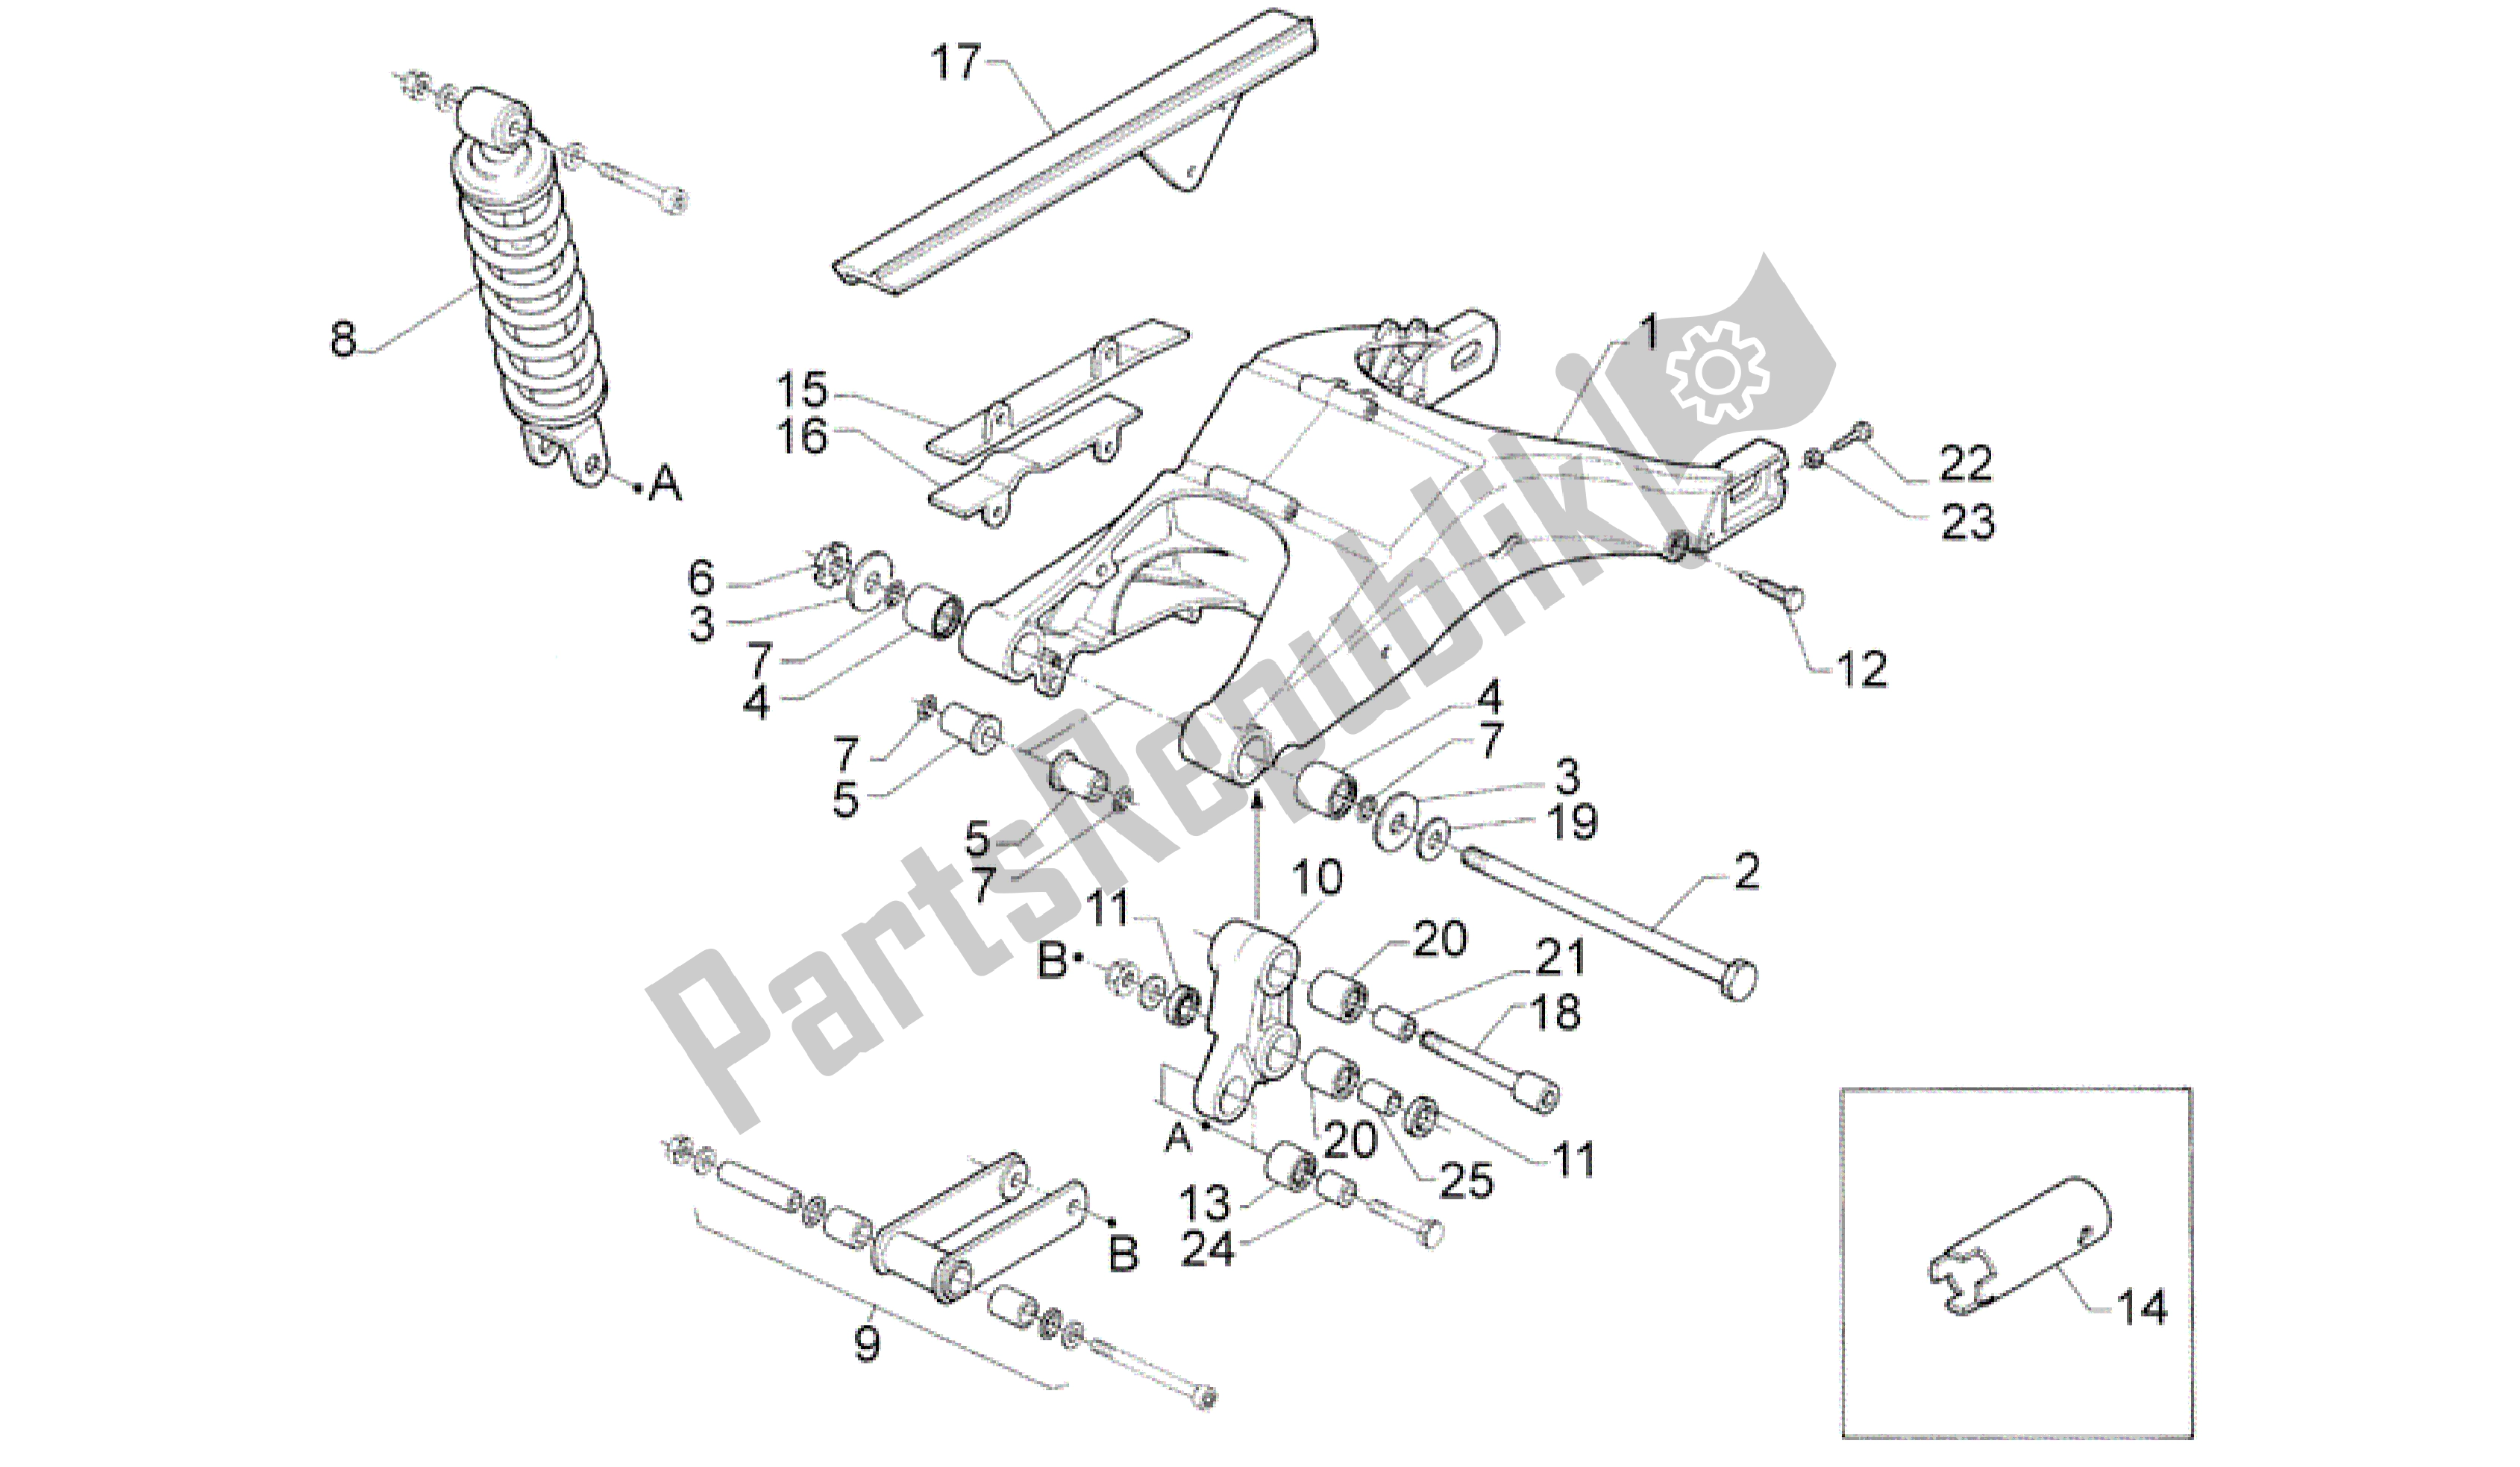 All parts for the Rear Shock Absorber of the Aprilia Rotax 122 125 1996 - 1997